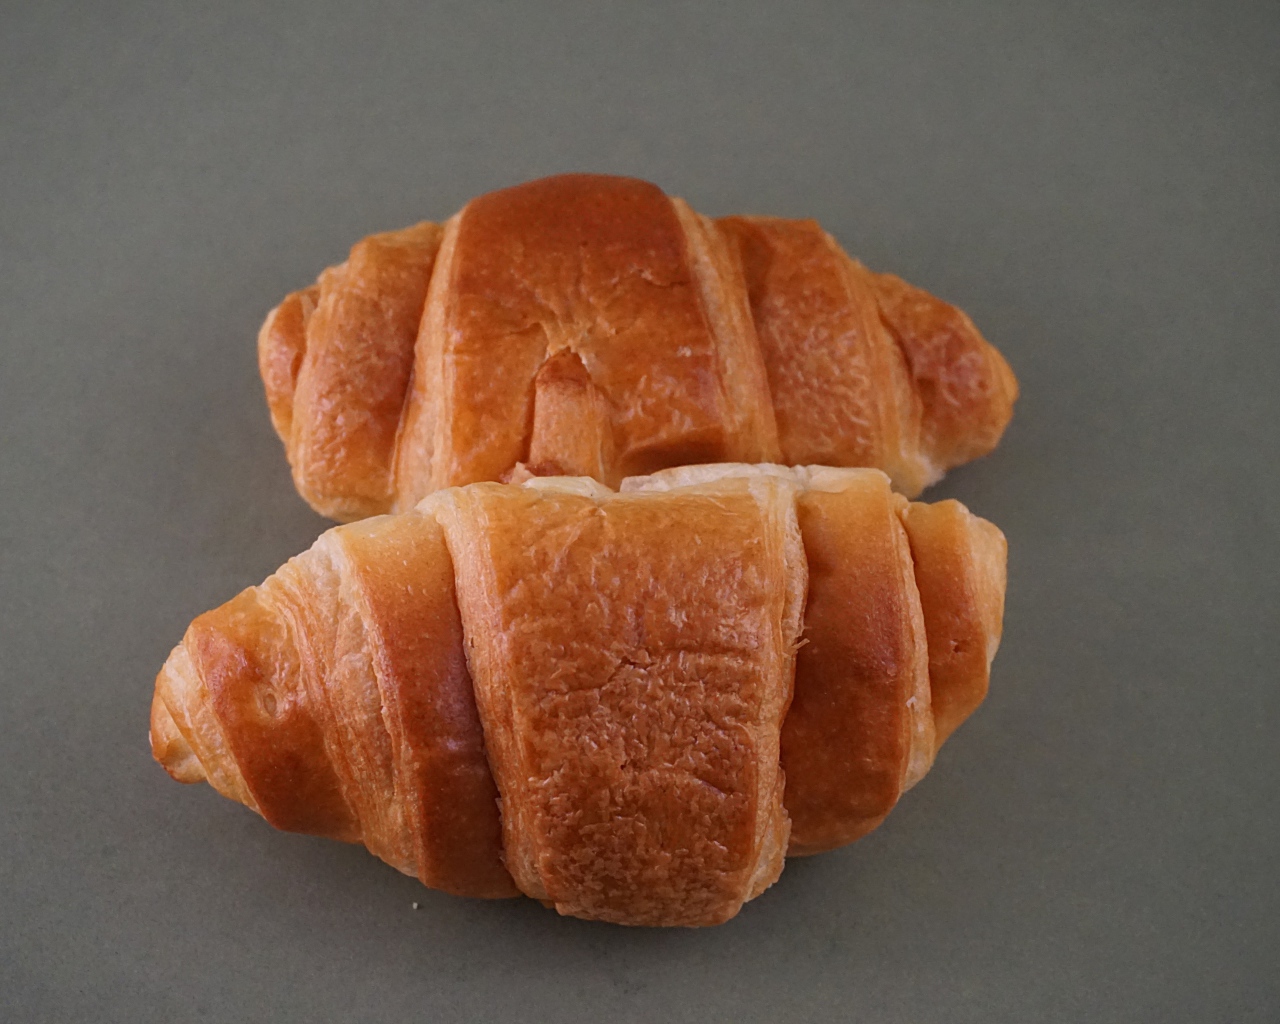 Two fresh croissants on a gray surface